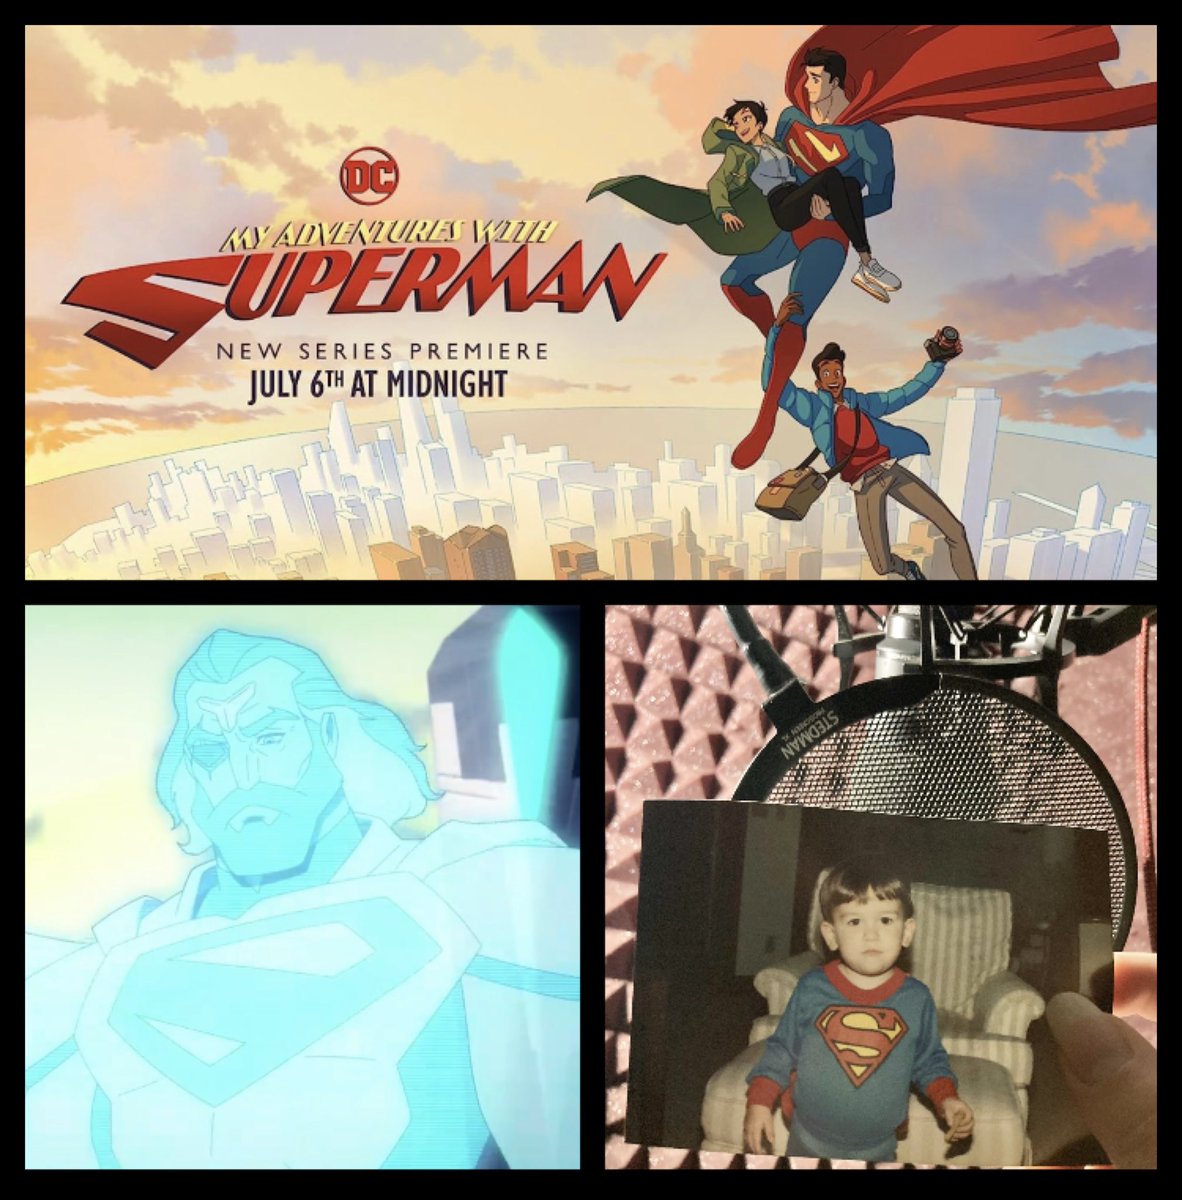 This announcement is one of my most treasured...been a DC Comics fan for a long time, as you can see. 😂

I’m the voice of Jor-El in #MyAdventuresWithSuperman! 
All the love to @A3ArtistsAgency and to the whole cast and crew. 🙌

Check out the first two episodes on @StreamOnMax!